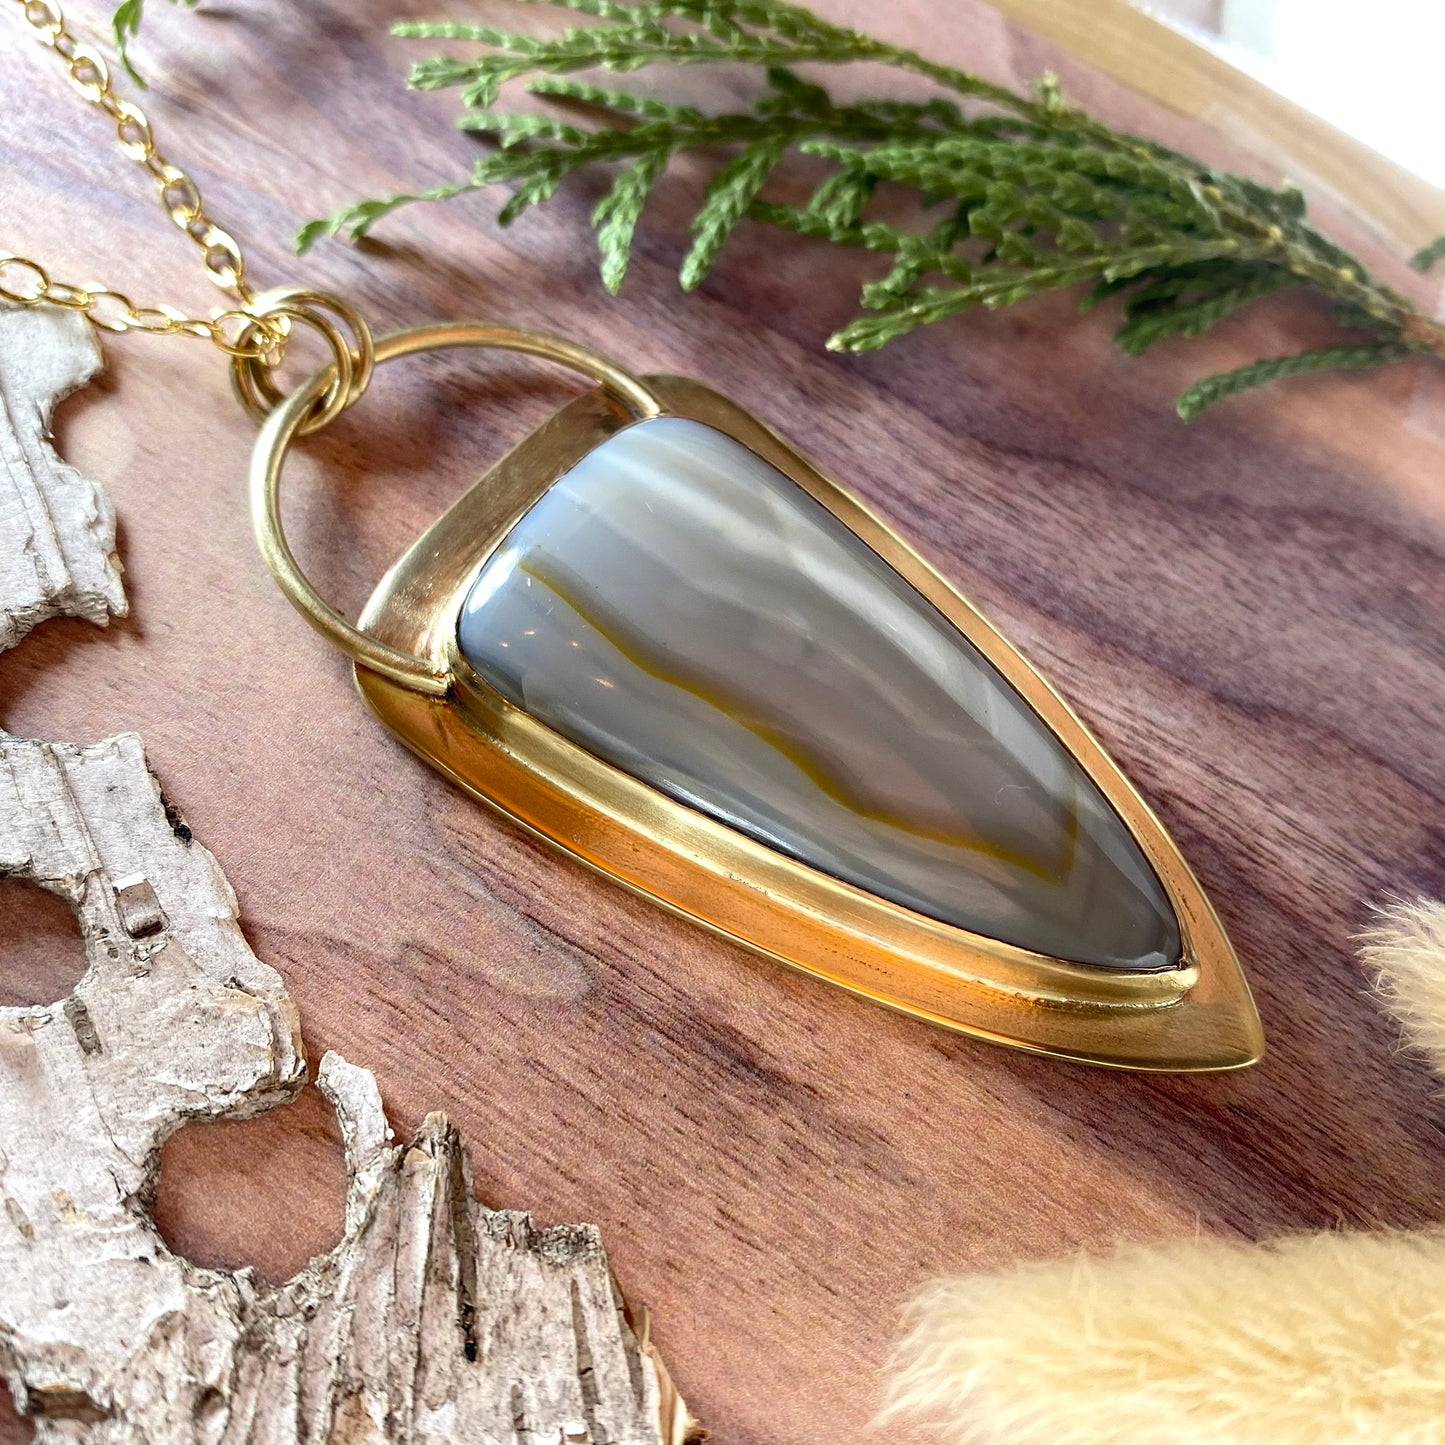 Yellow Skin Agate Pendant Necklace Front View II - Stone Treasures by the Lake